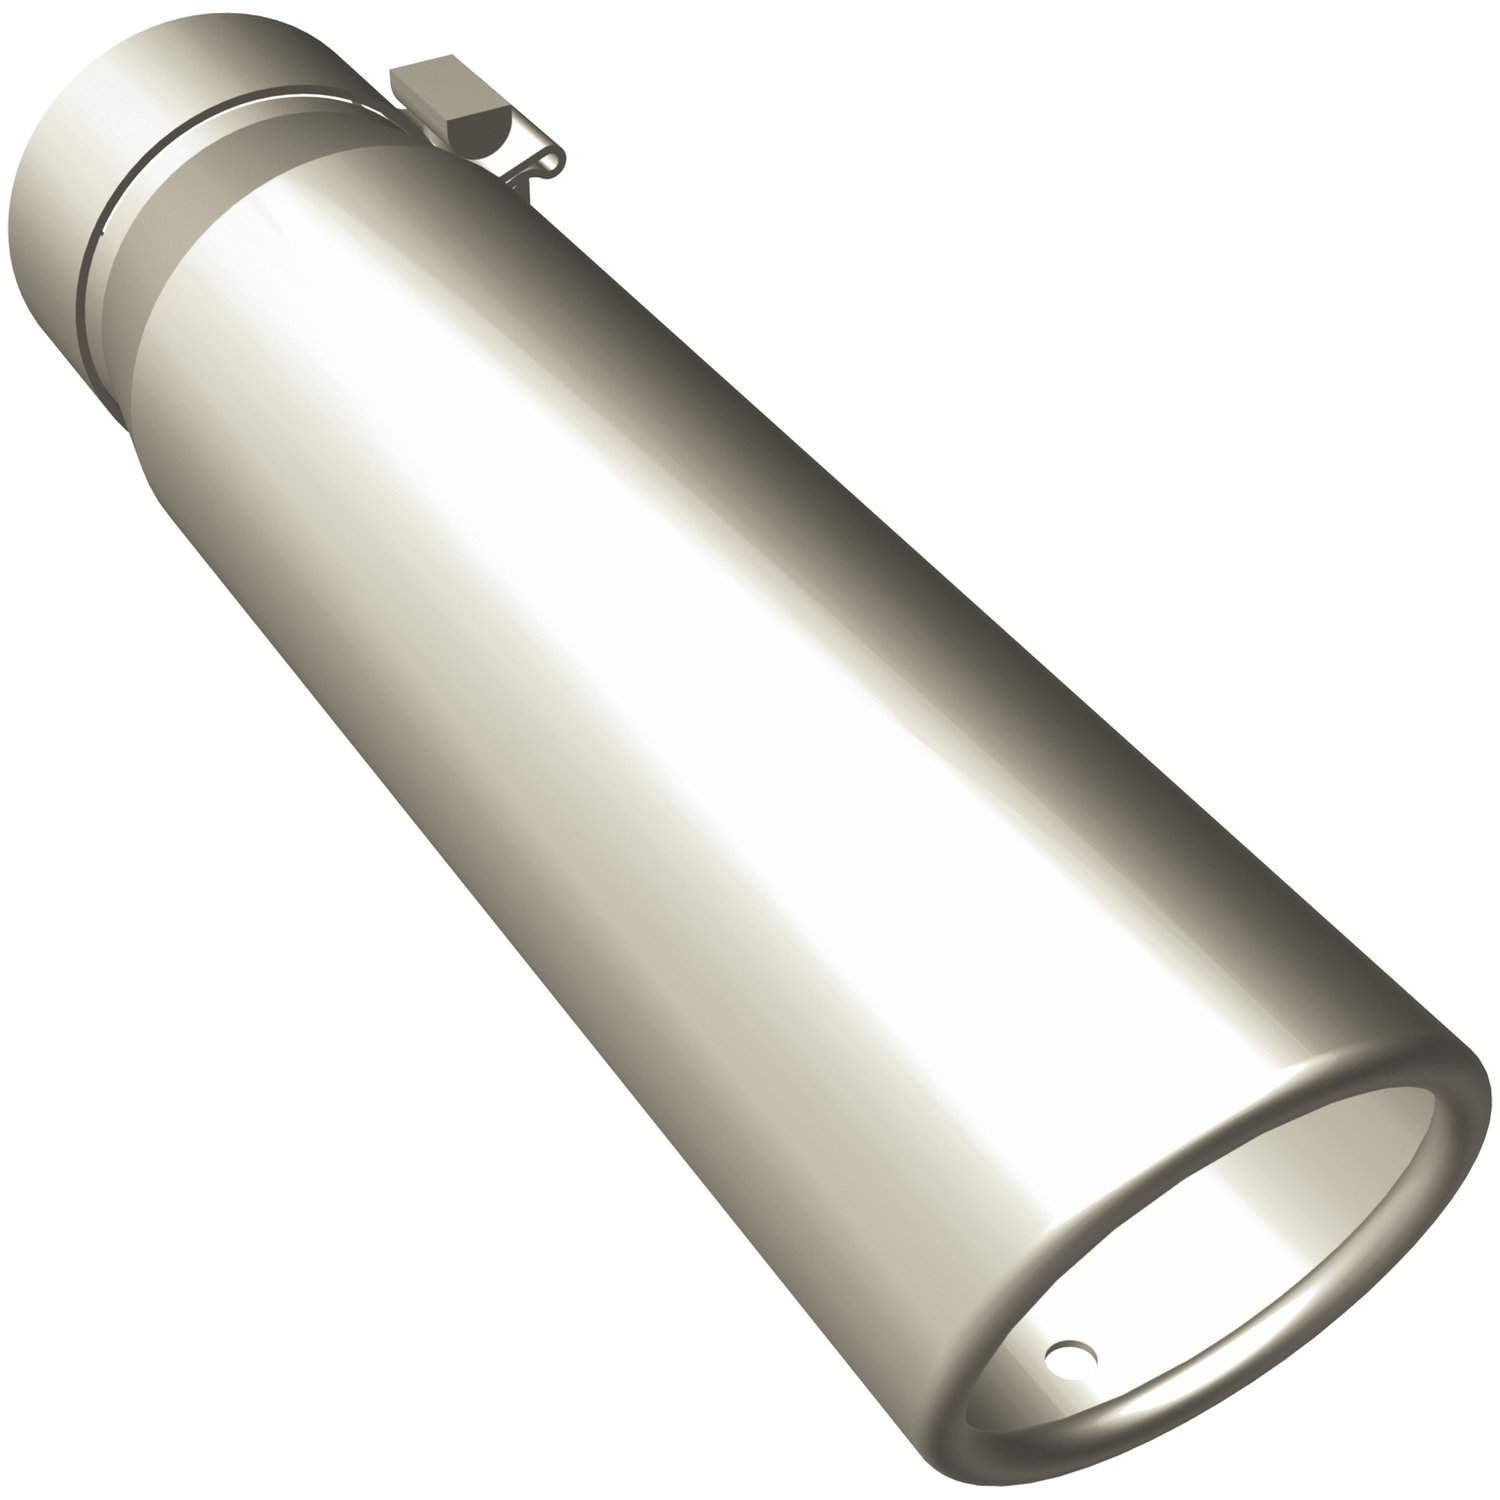 Polished Stainless Steel Clamp-On Single Exhaust Tip Inlet Inside Diameter: 2.5"